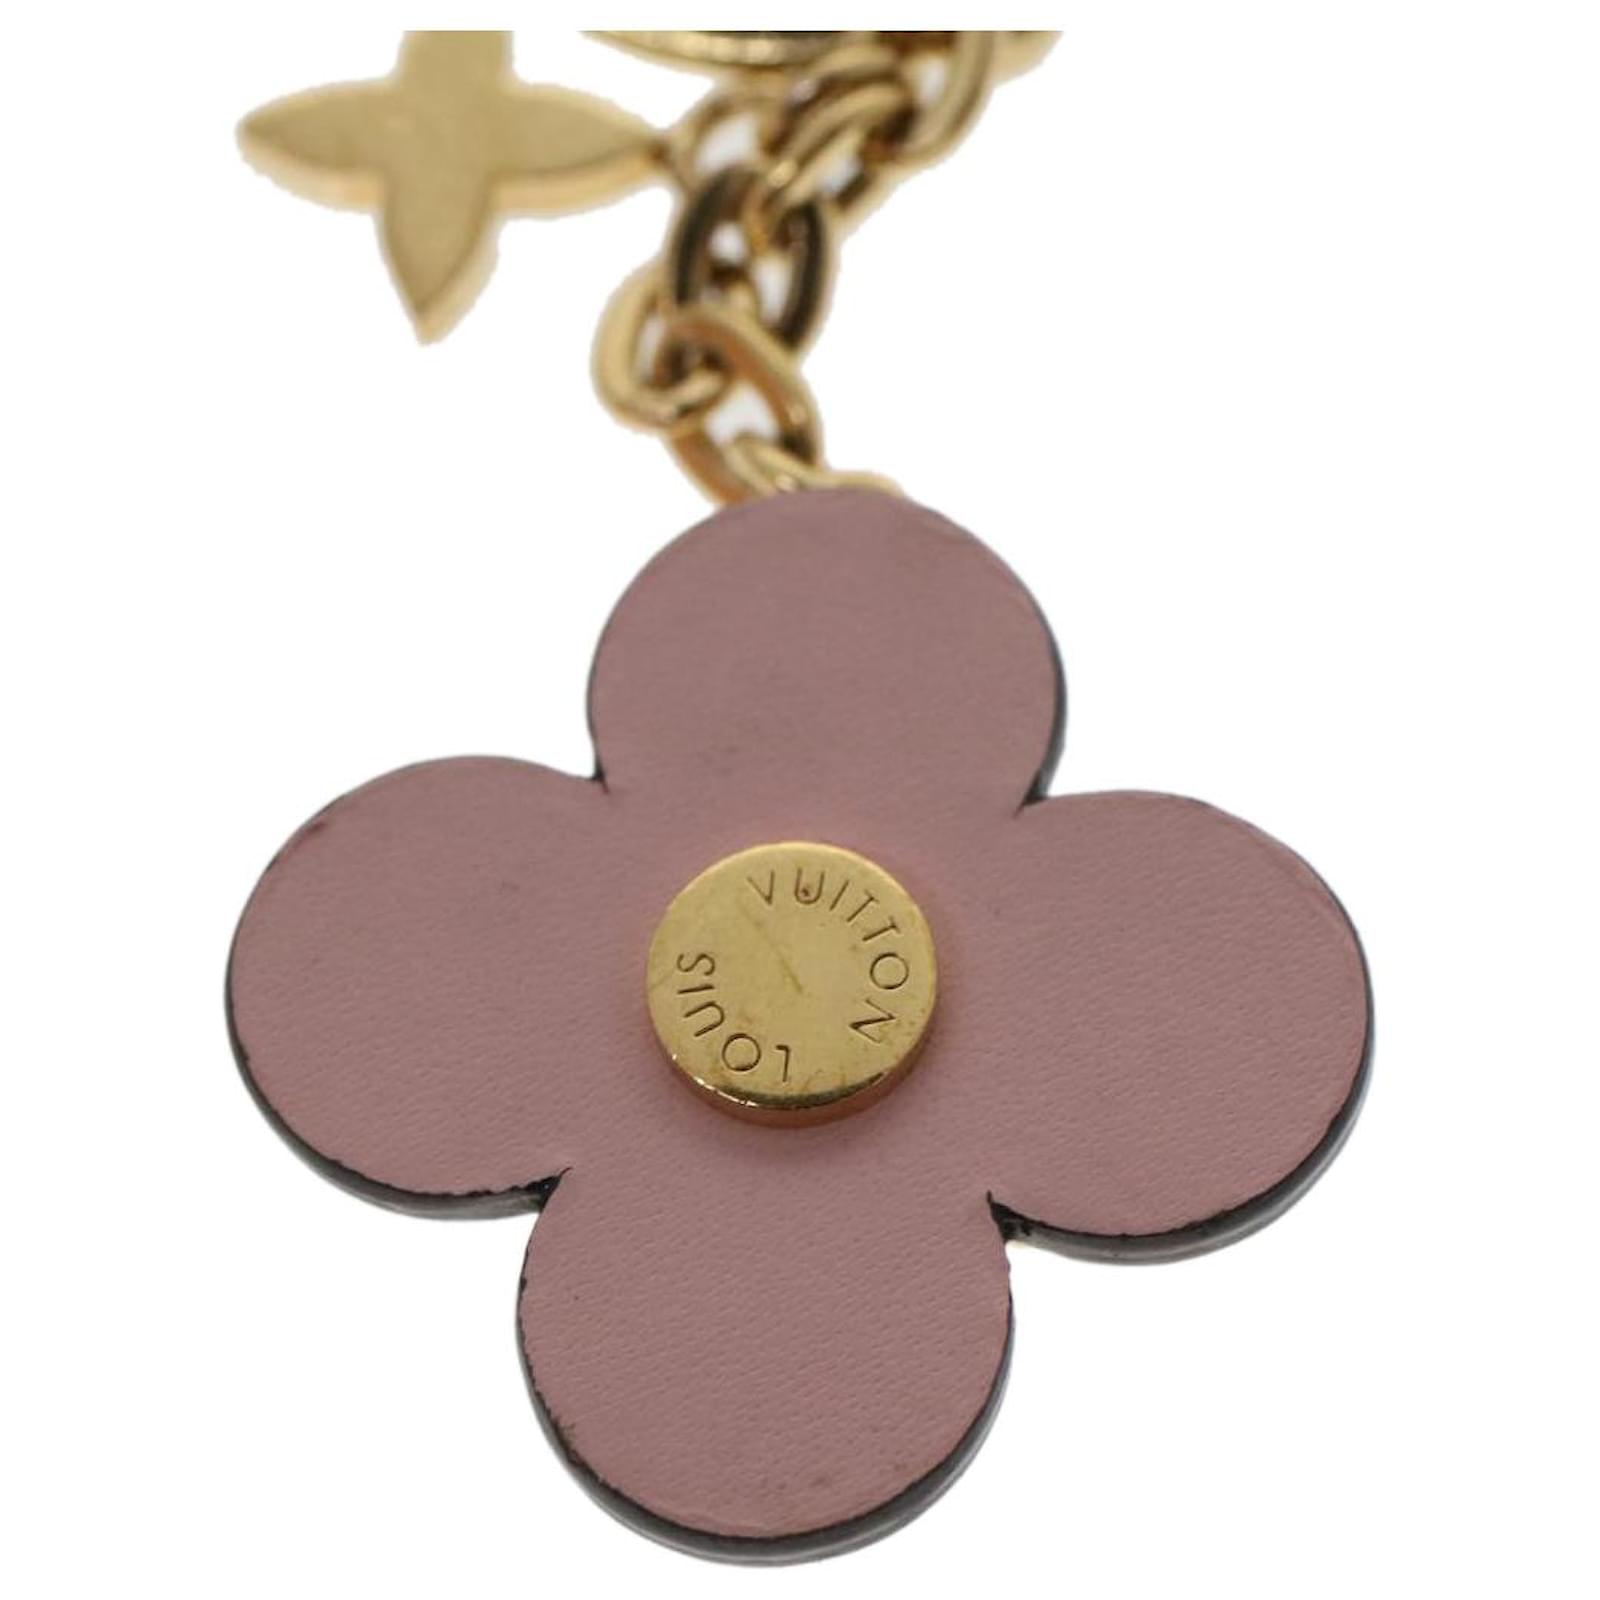 Louis Vuitton Blooming Flowers Chain Bag Charm & Key Holder - Pink